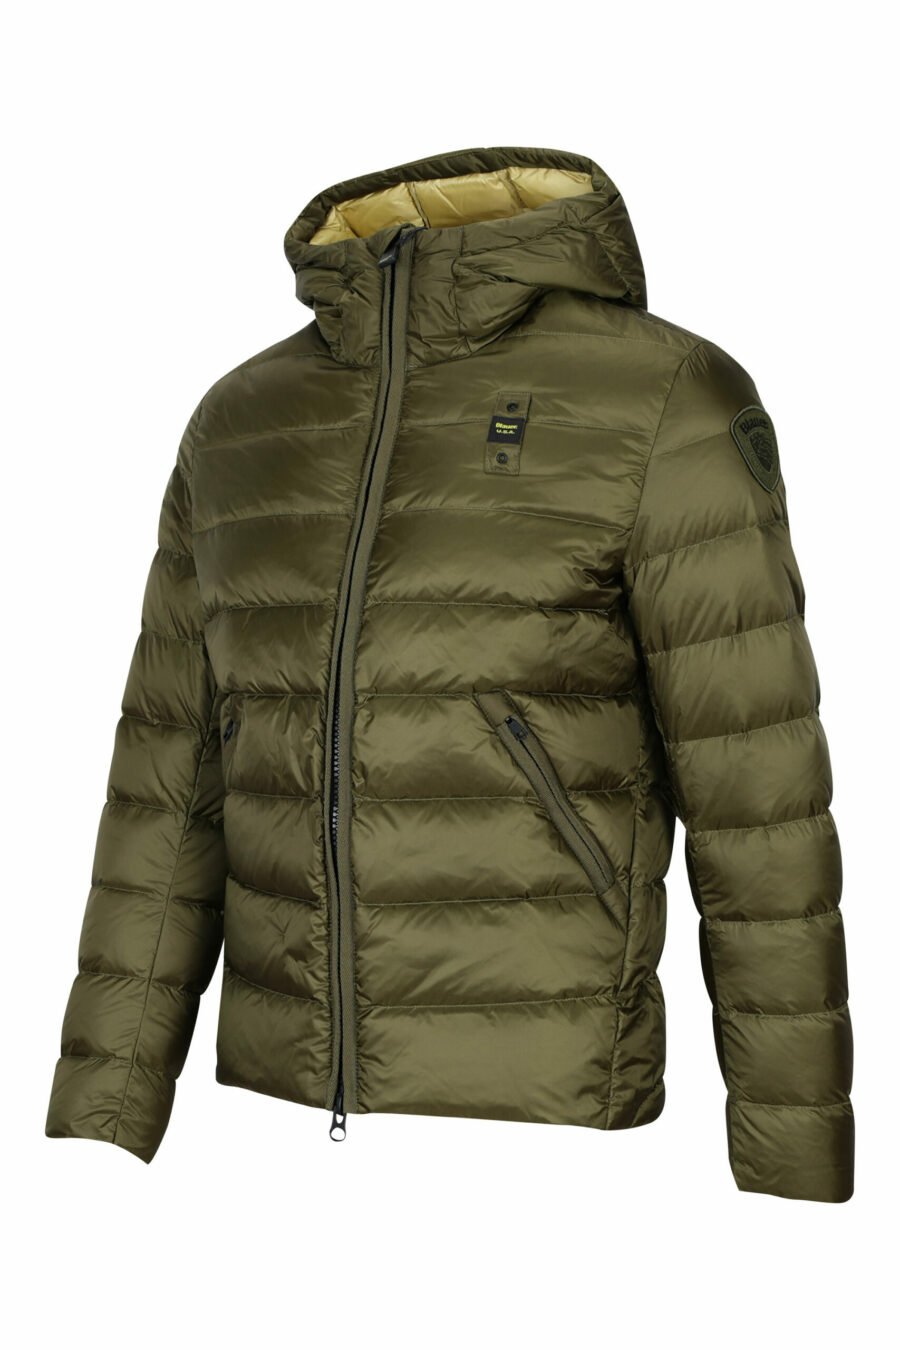 Military green hooded jacket with straight lines and yellow inside - 8058610657482 2 scaled